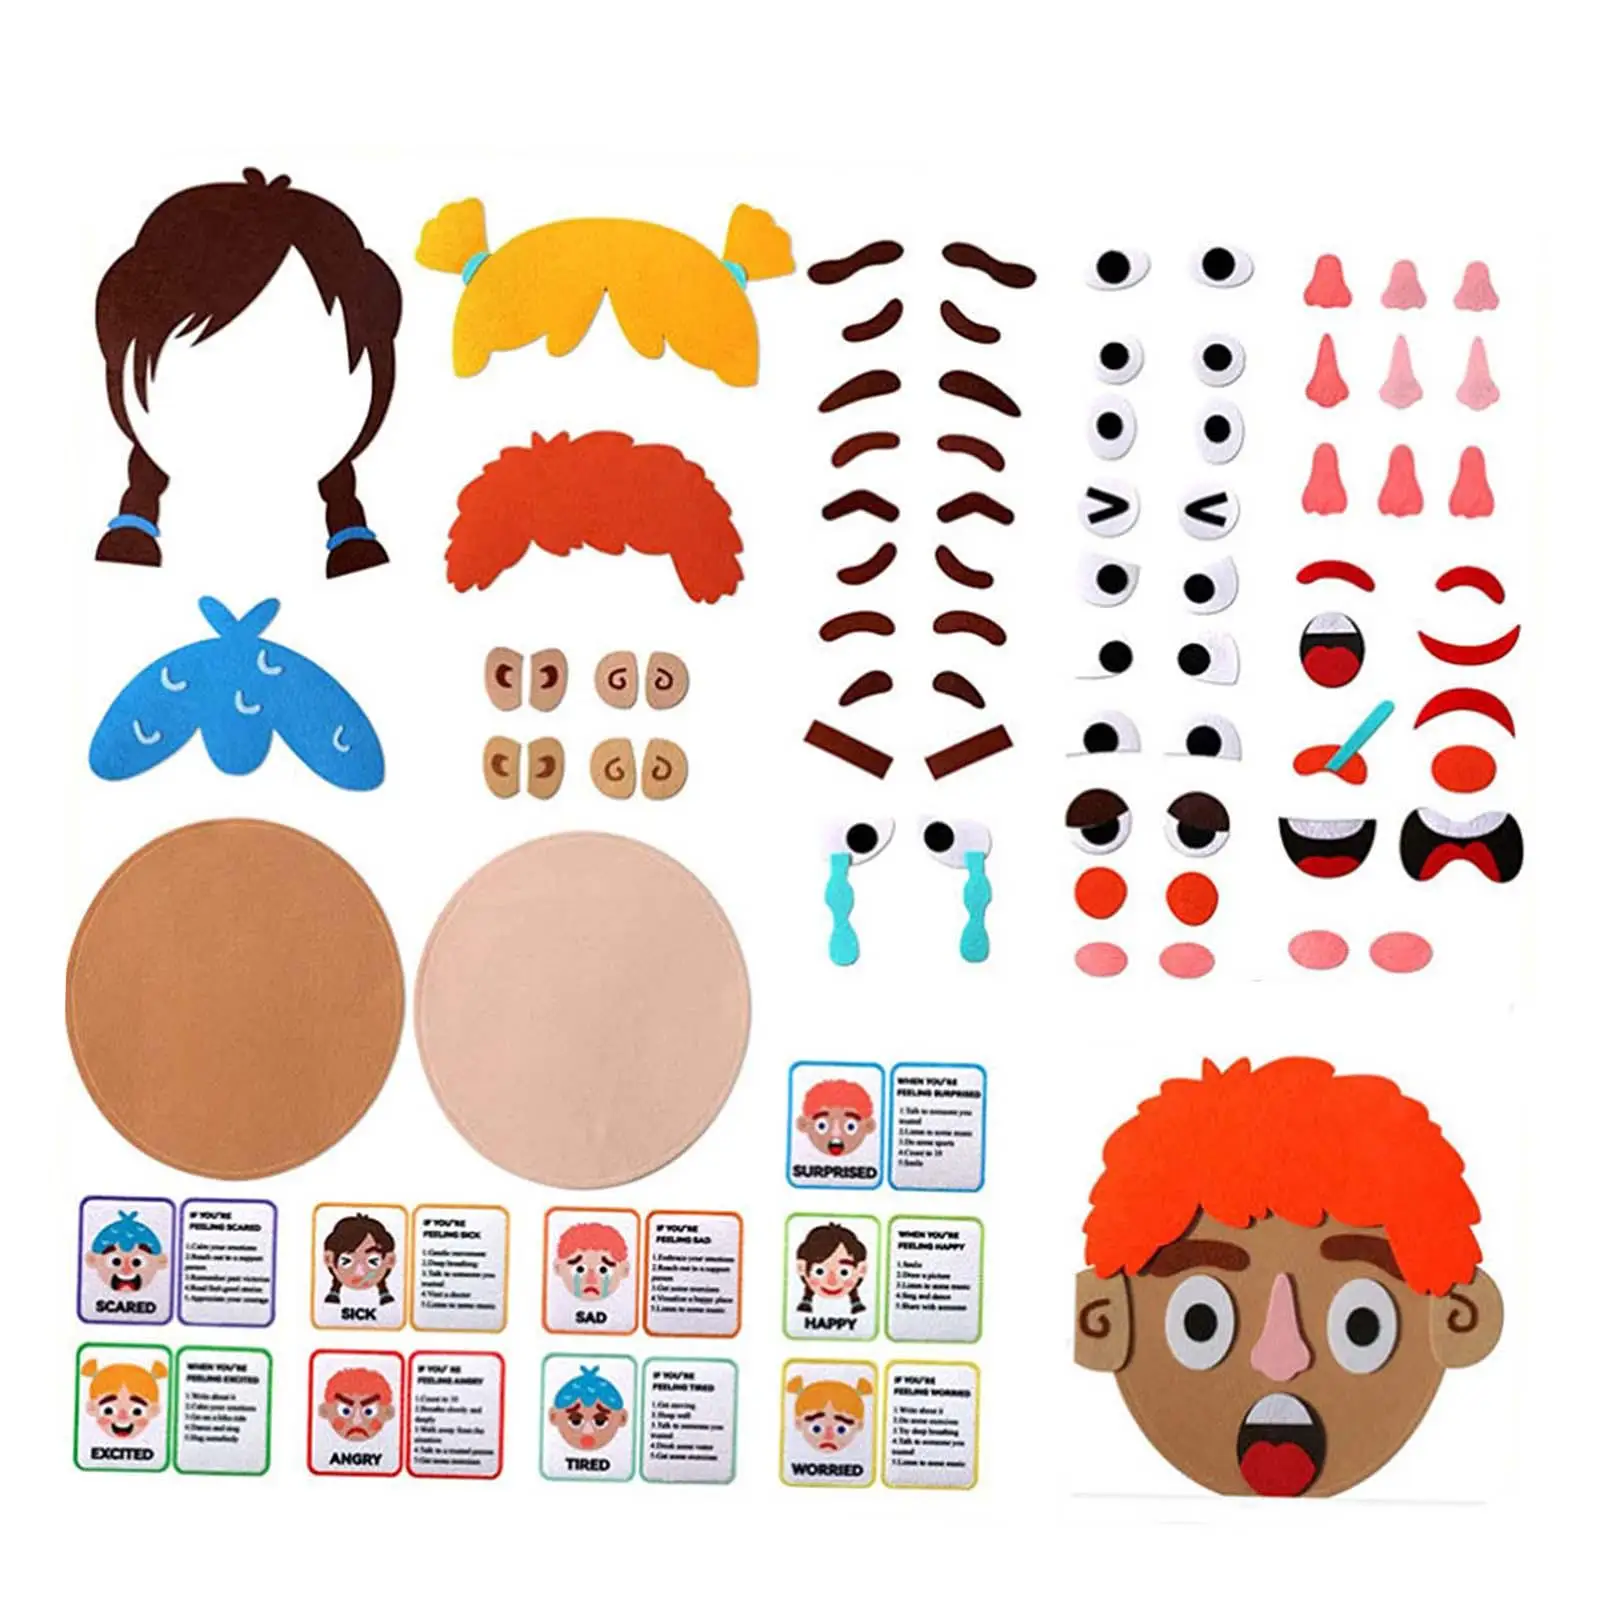 Social Emotional Learning Games for Kids Learning Sensory Toy Activities Faces Games Faces Stickers Games for Girls Kids Ages 3+